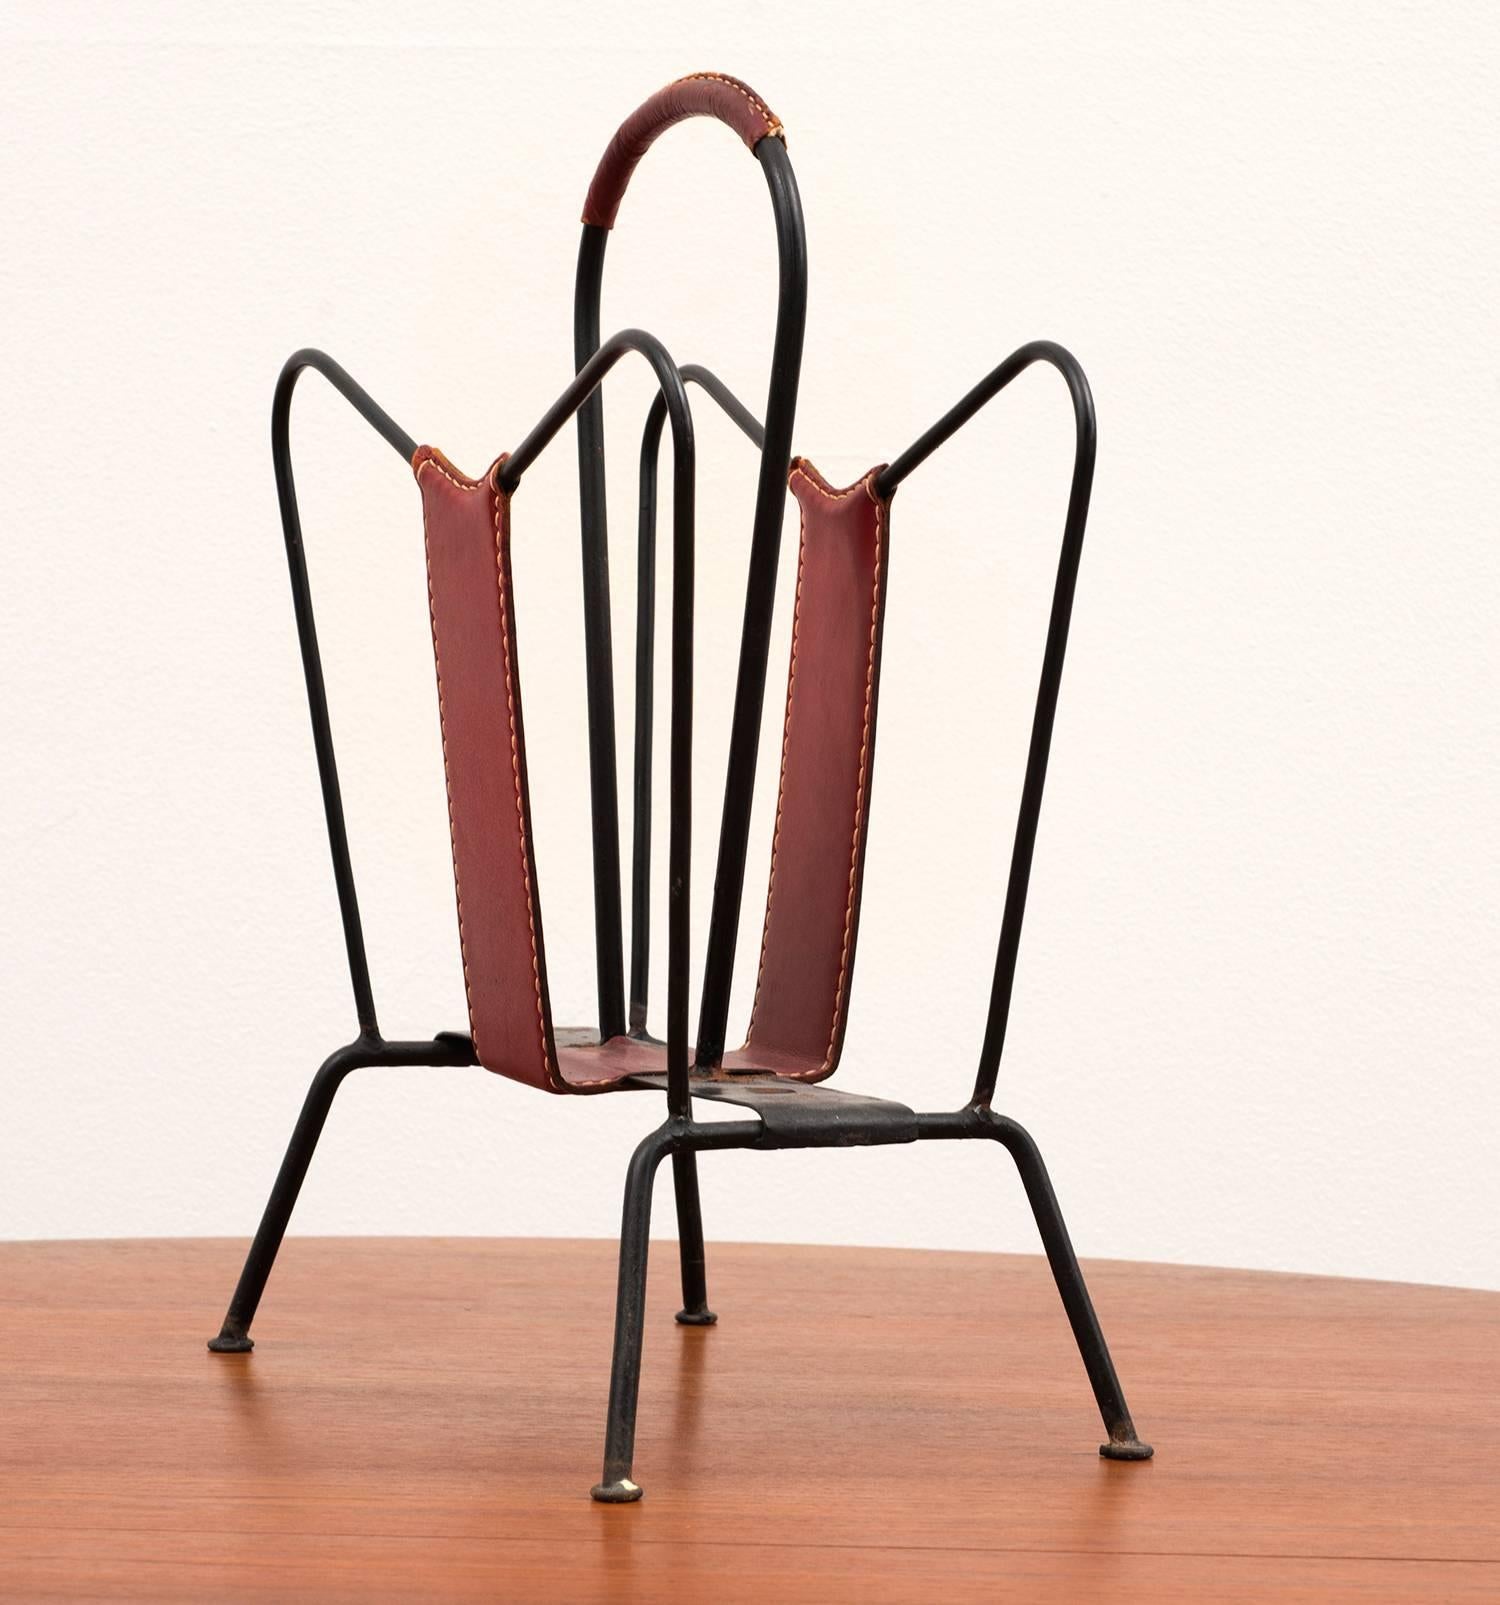 Classic magazine rack by Jacques Adnet in aged iron and red leather with contrast stitching, France, 1950s.